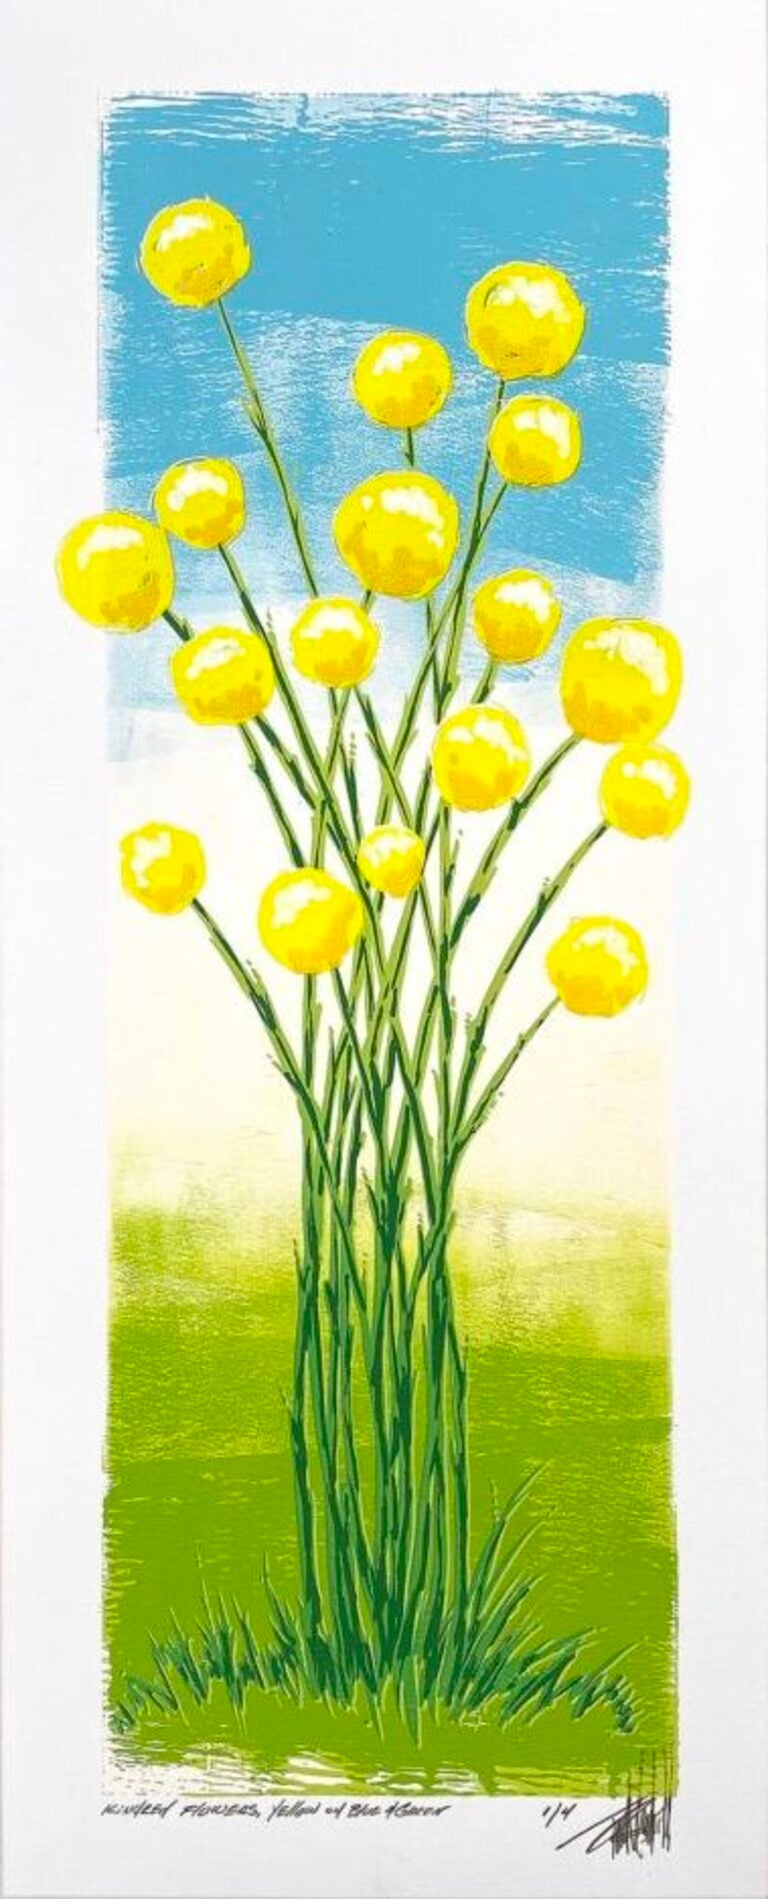 Terrell Thornhill  Landscape Print - Kindred Flowers, Yellow on Blue 